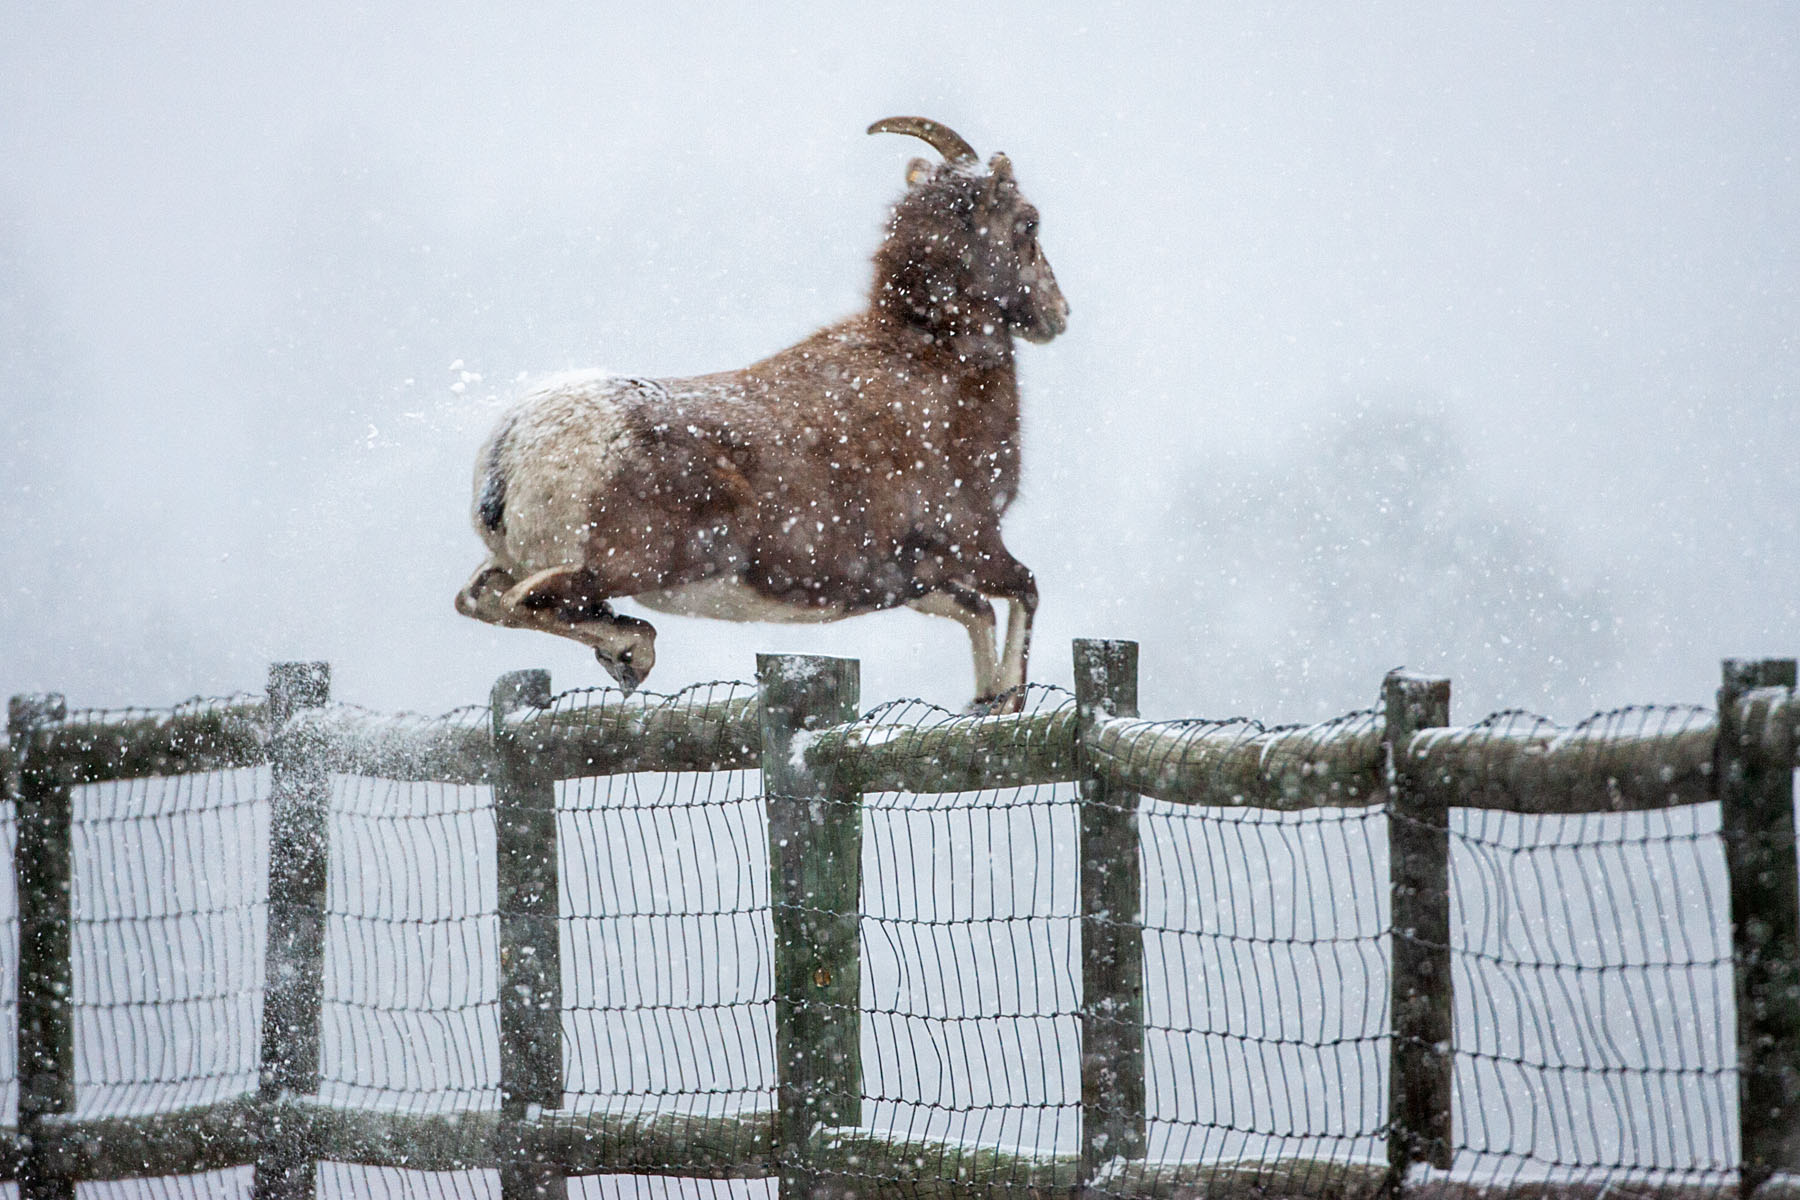 Rocky Mountain Bighorn ewe leaps 4-foot fence, Custer State Park.  Click for next photo.